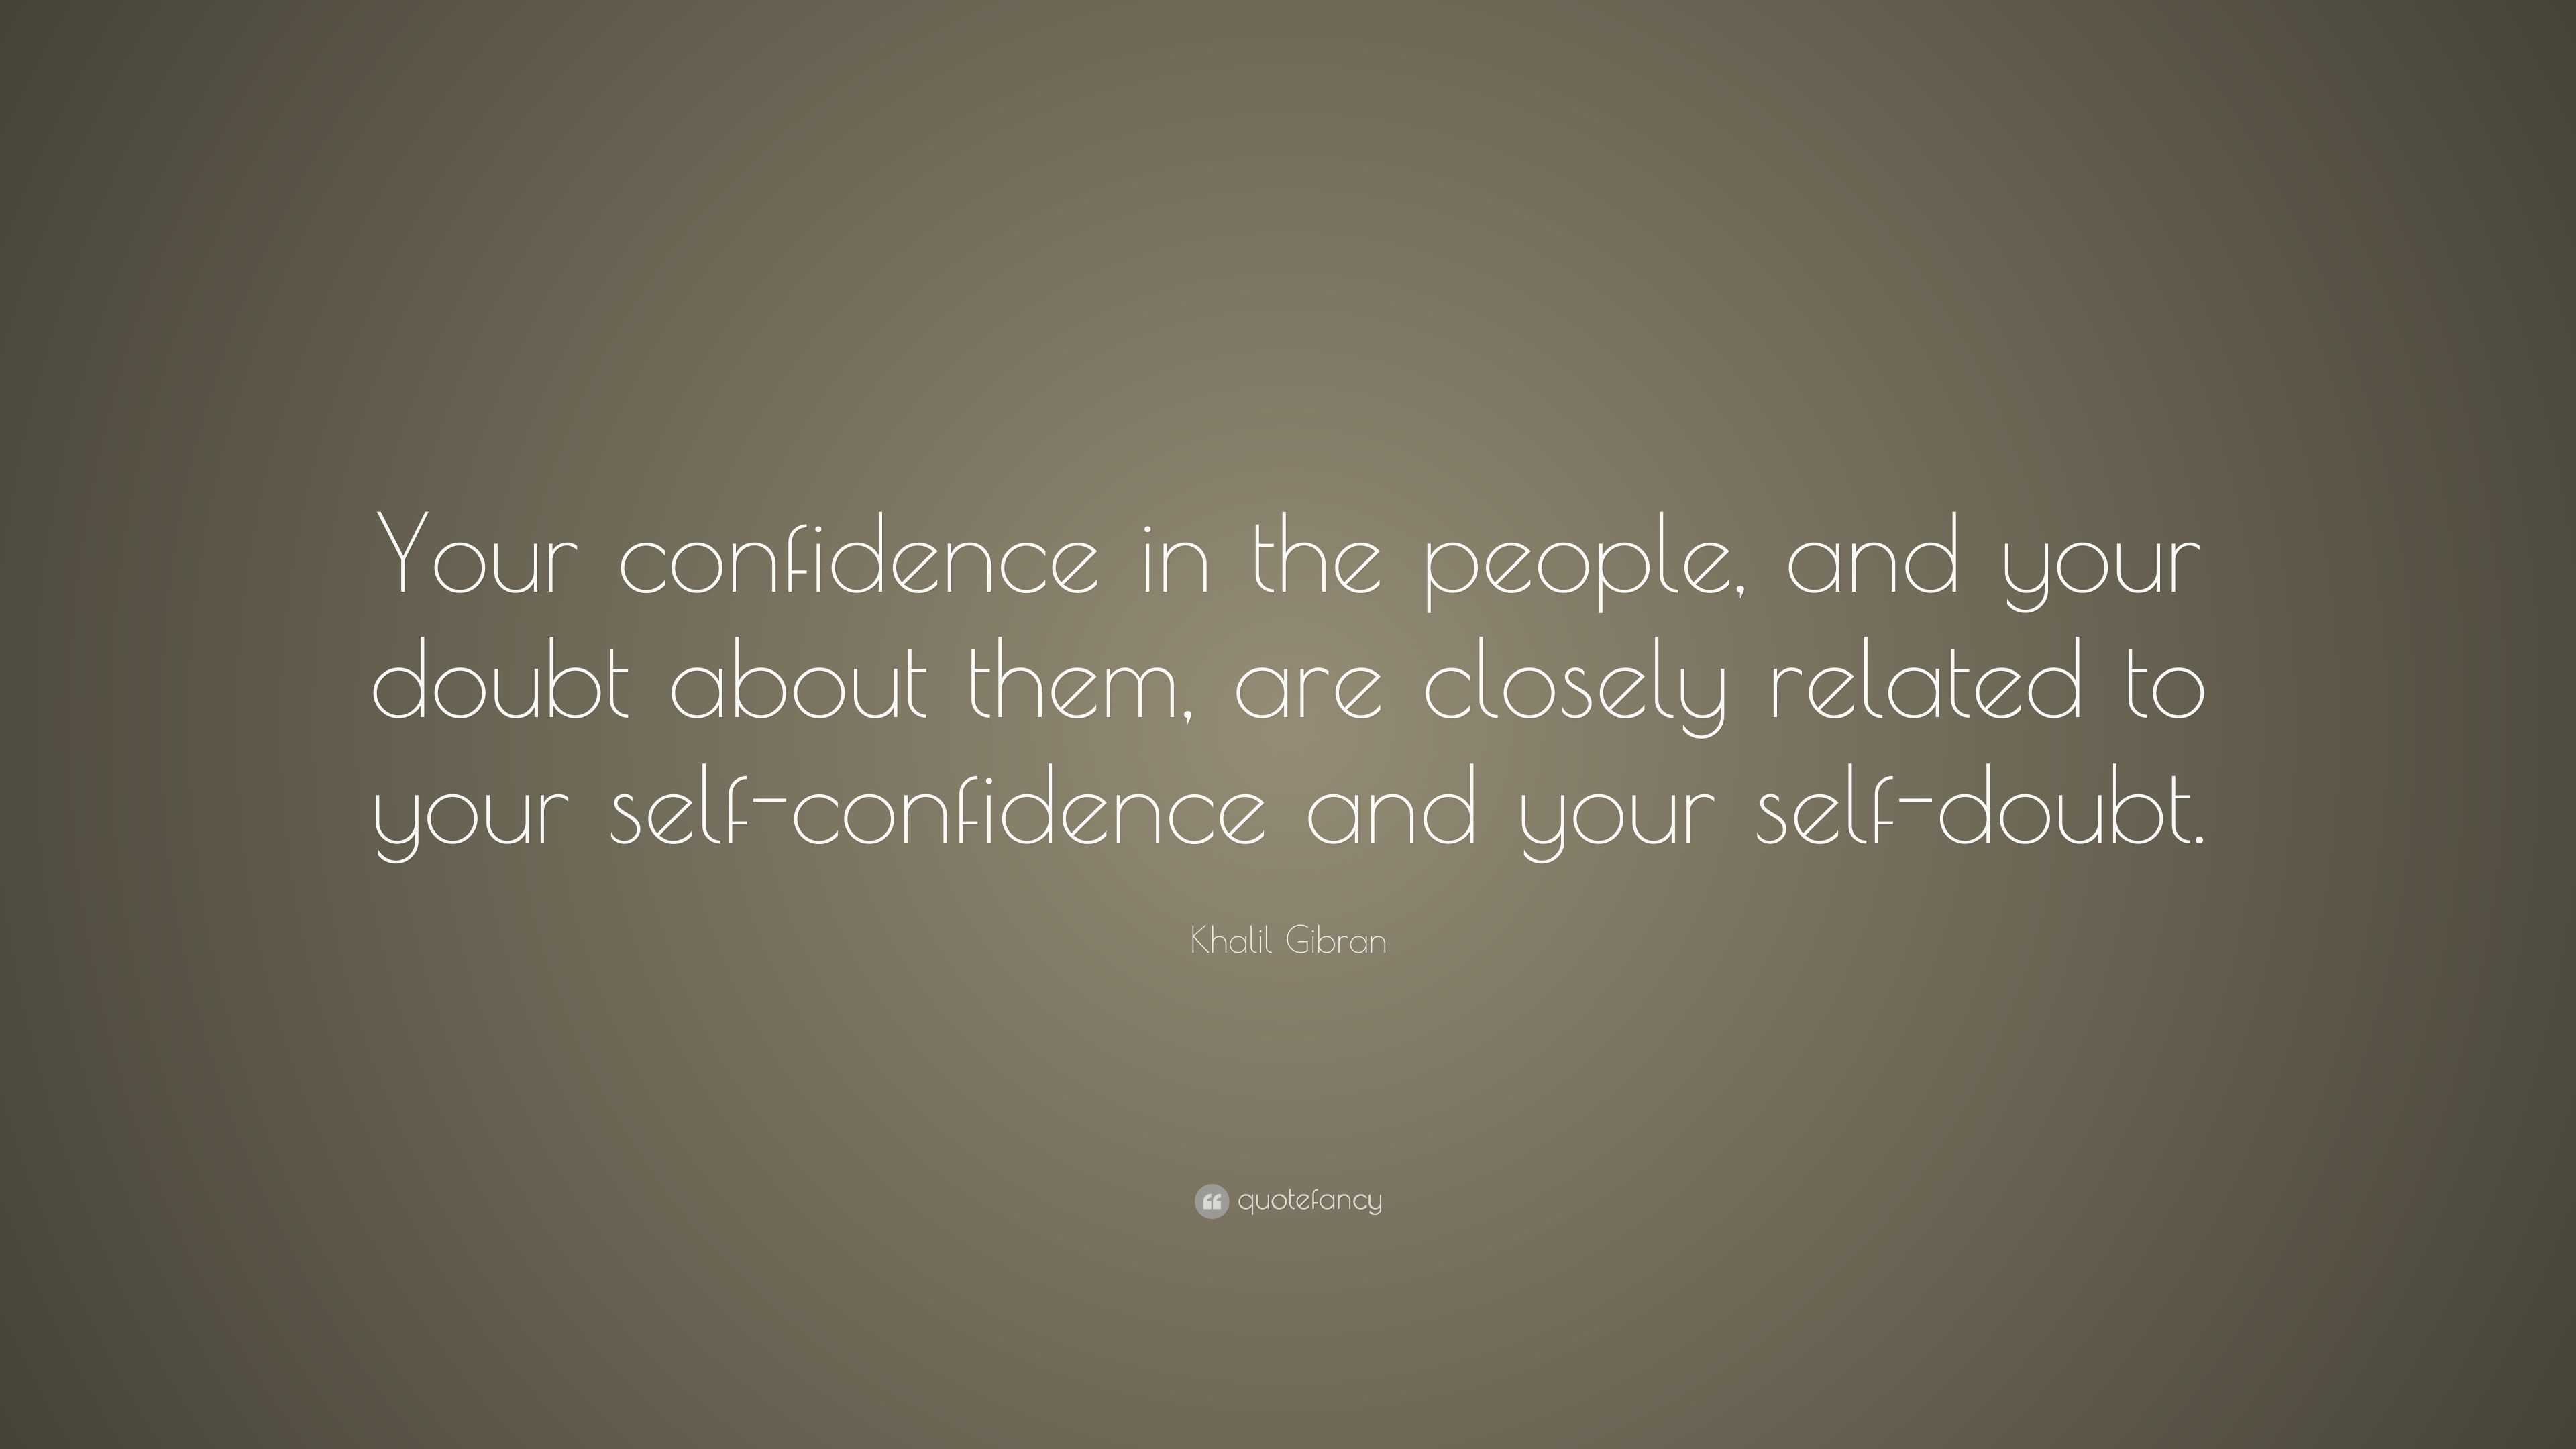 Khalil Gibran Quote: “Your confidence in the people, and your doubt ...